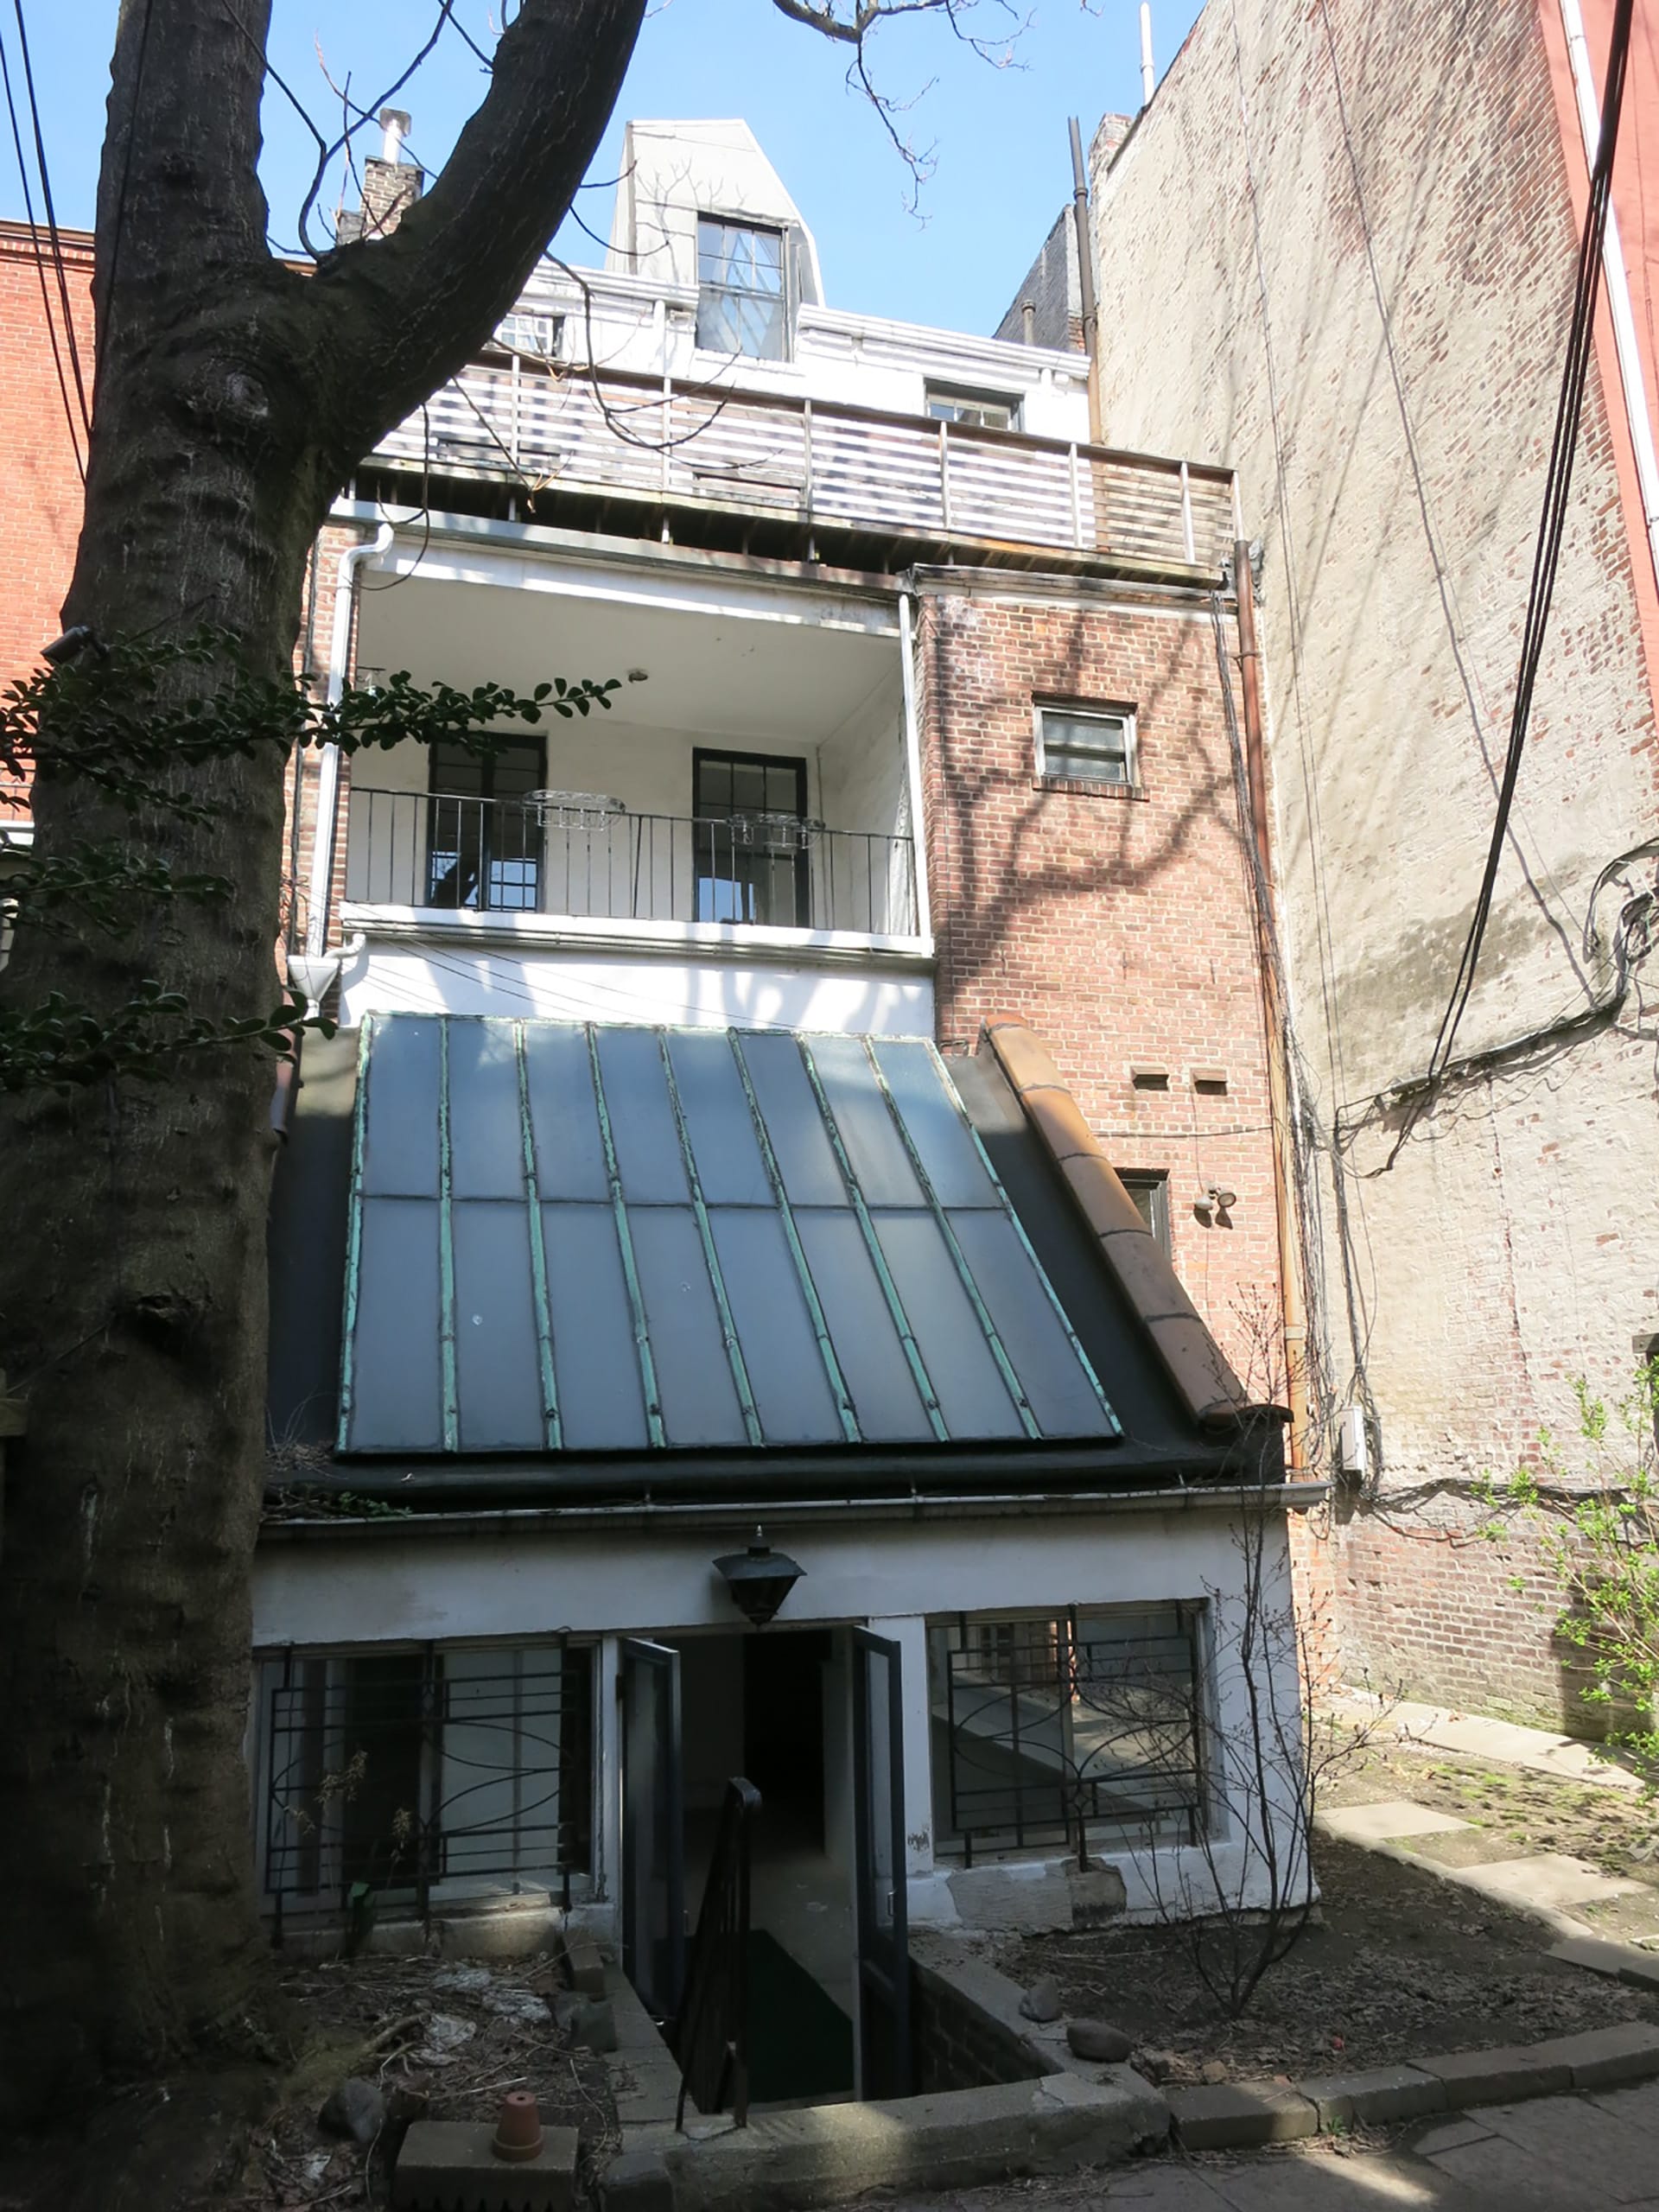 Rear facade of a Brooklyn Heights townhouse. A two story extension has a sloped glass roof. On the third floor, a balcony spans the left half of the building. The right half of the building is clad in brick.